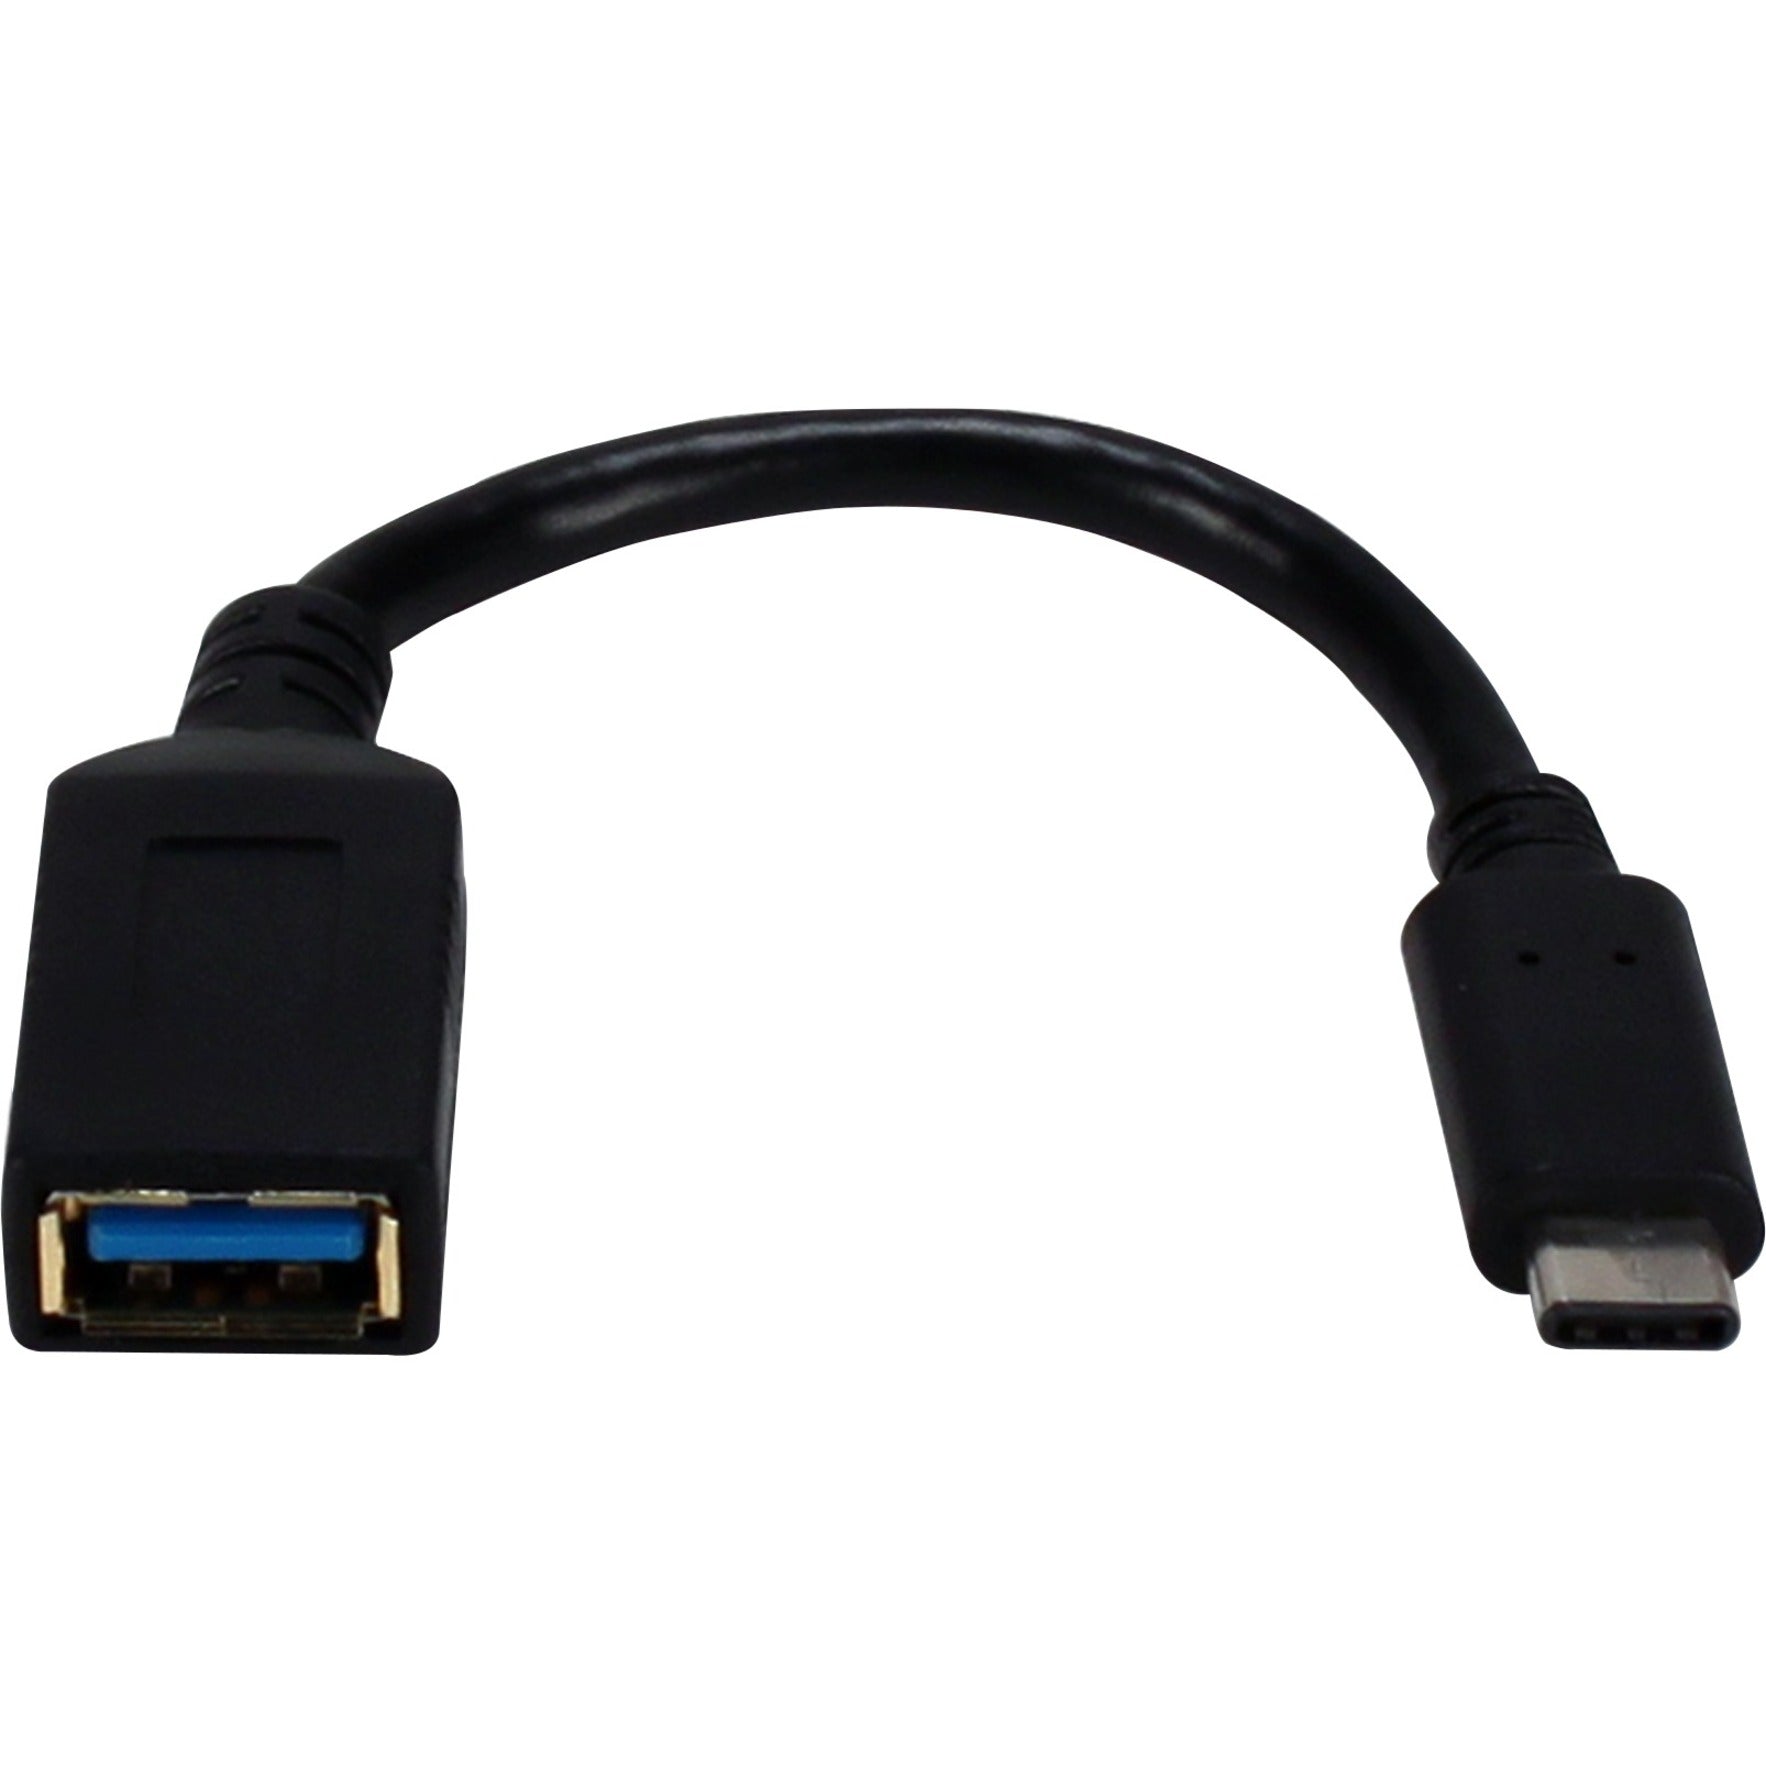 QVS CC2231MF USB-C Male to USB-A Female SuperSpeed 5Gbps 3Amp Cable, Reversible Charging, 6" Length